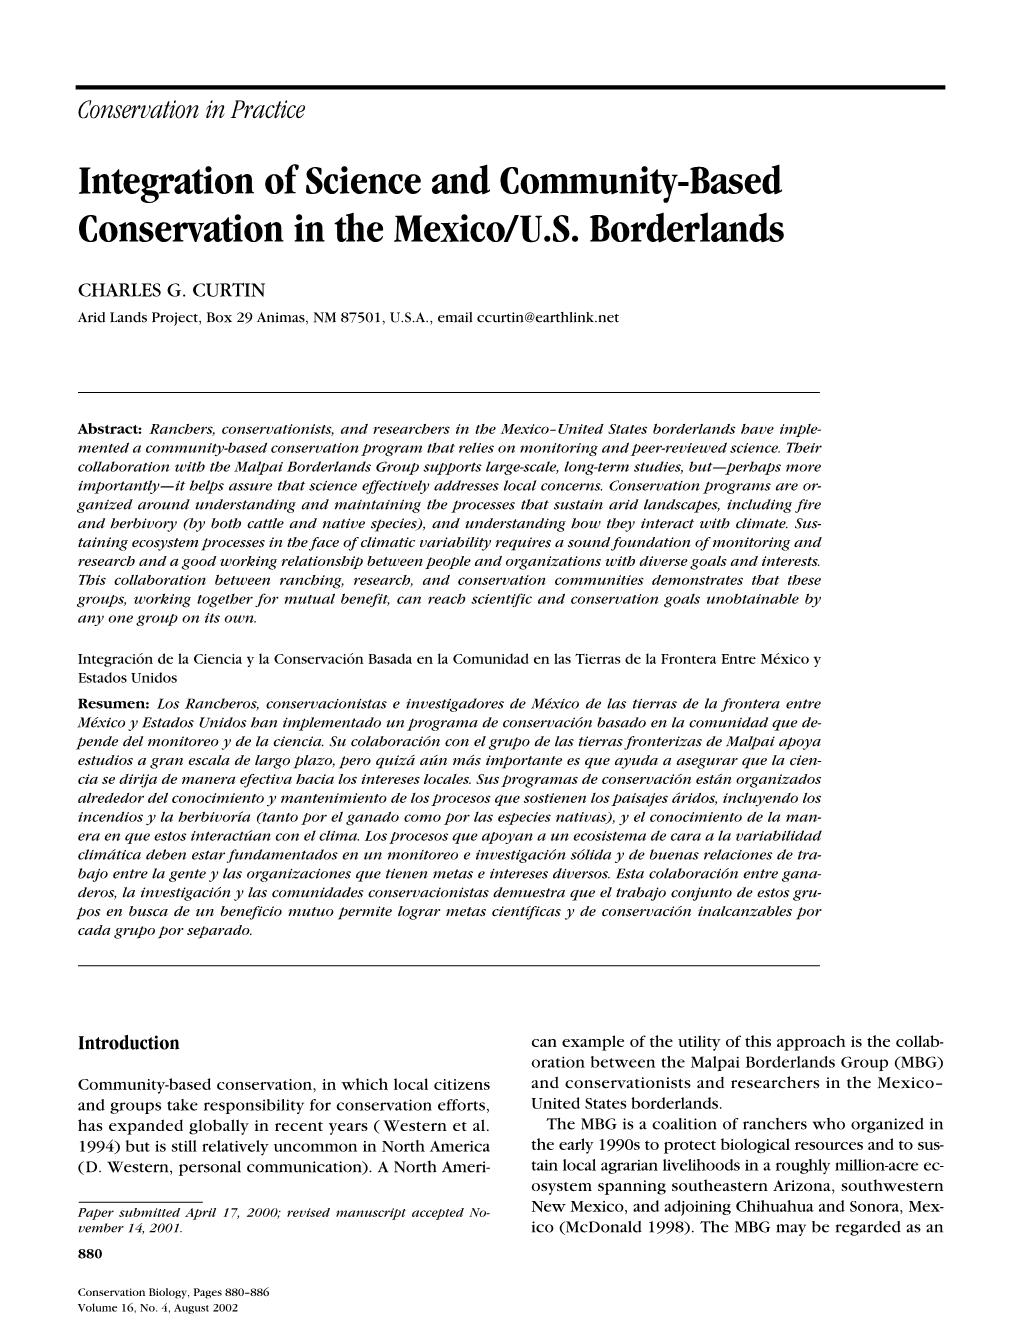 Integration of Science and Community-Based Conservation in the Mexico/U.S